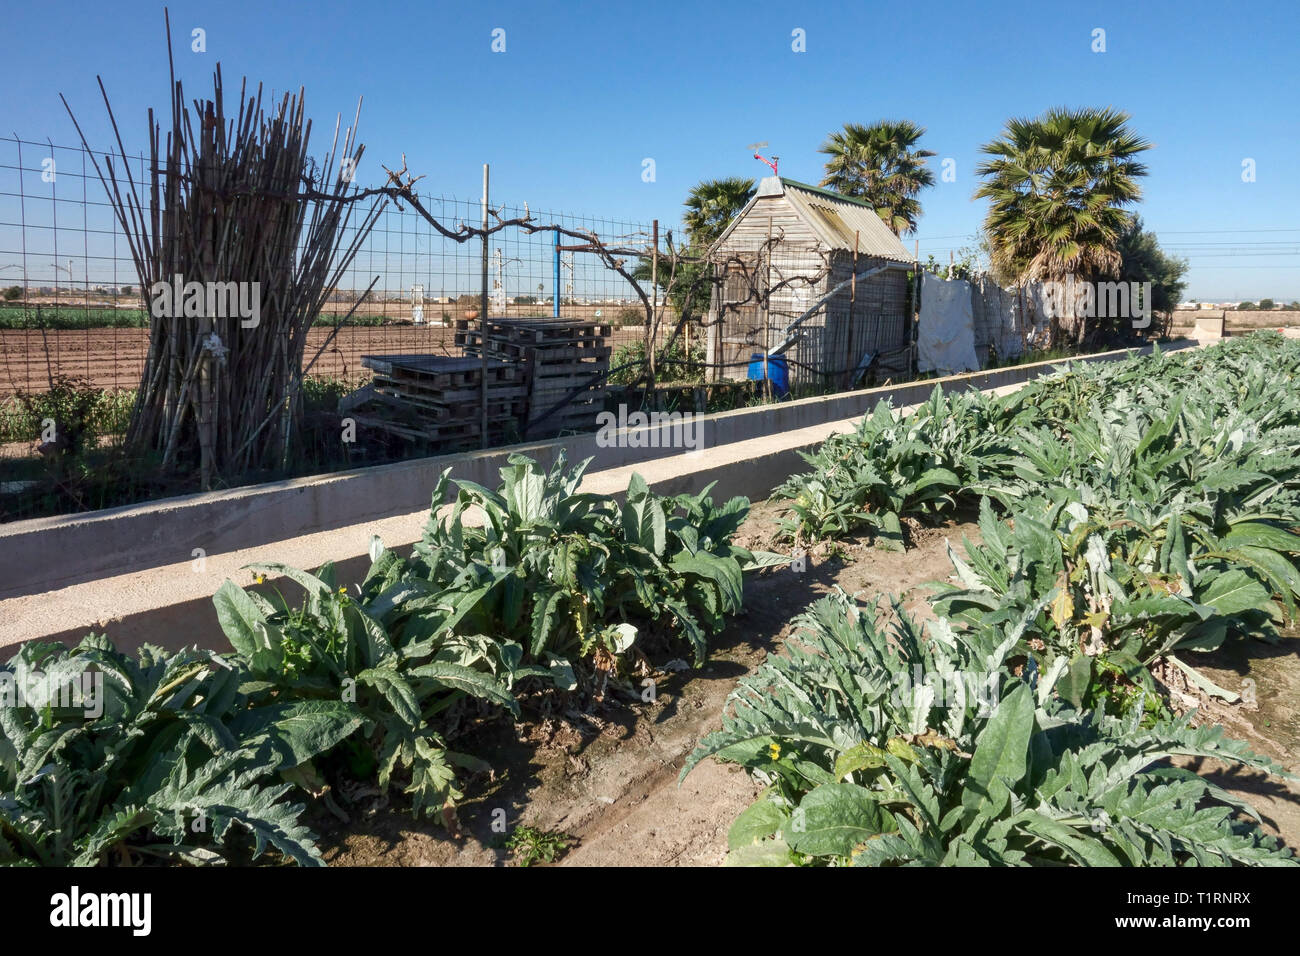 Field with artichokes and tiny buildings sheds and irrigation canal, near Valencia, Spain farm landscape huerta Stock Photo